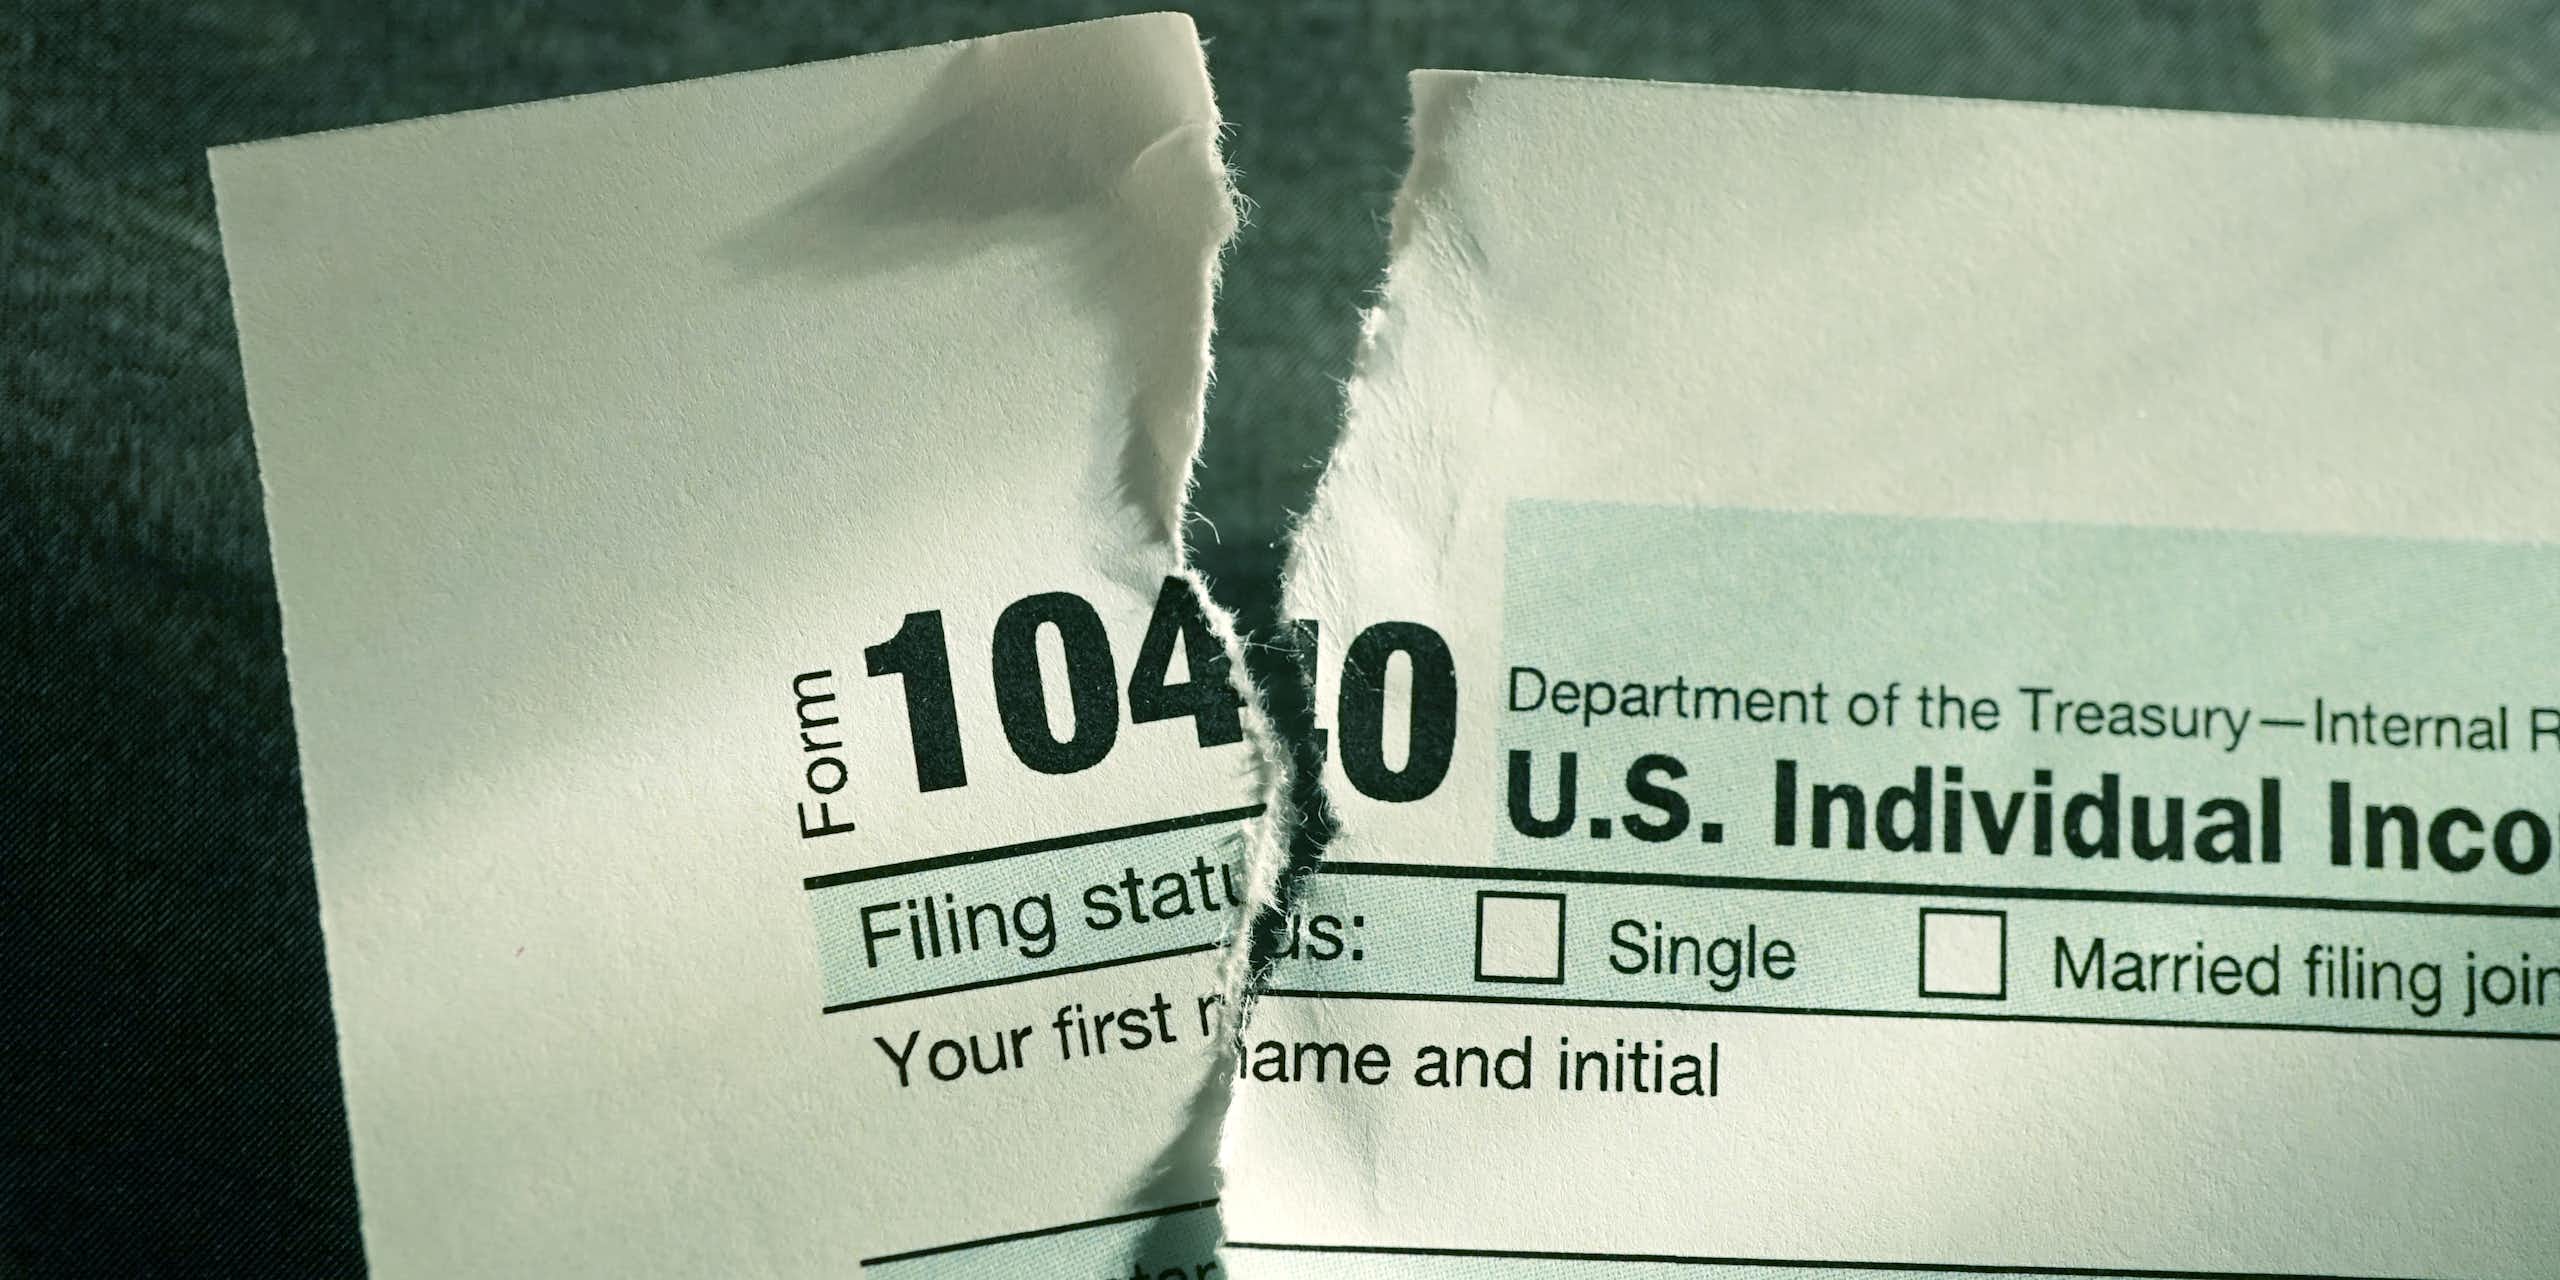 A torn-up copy of IRS tax form 1040.